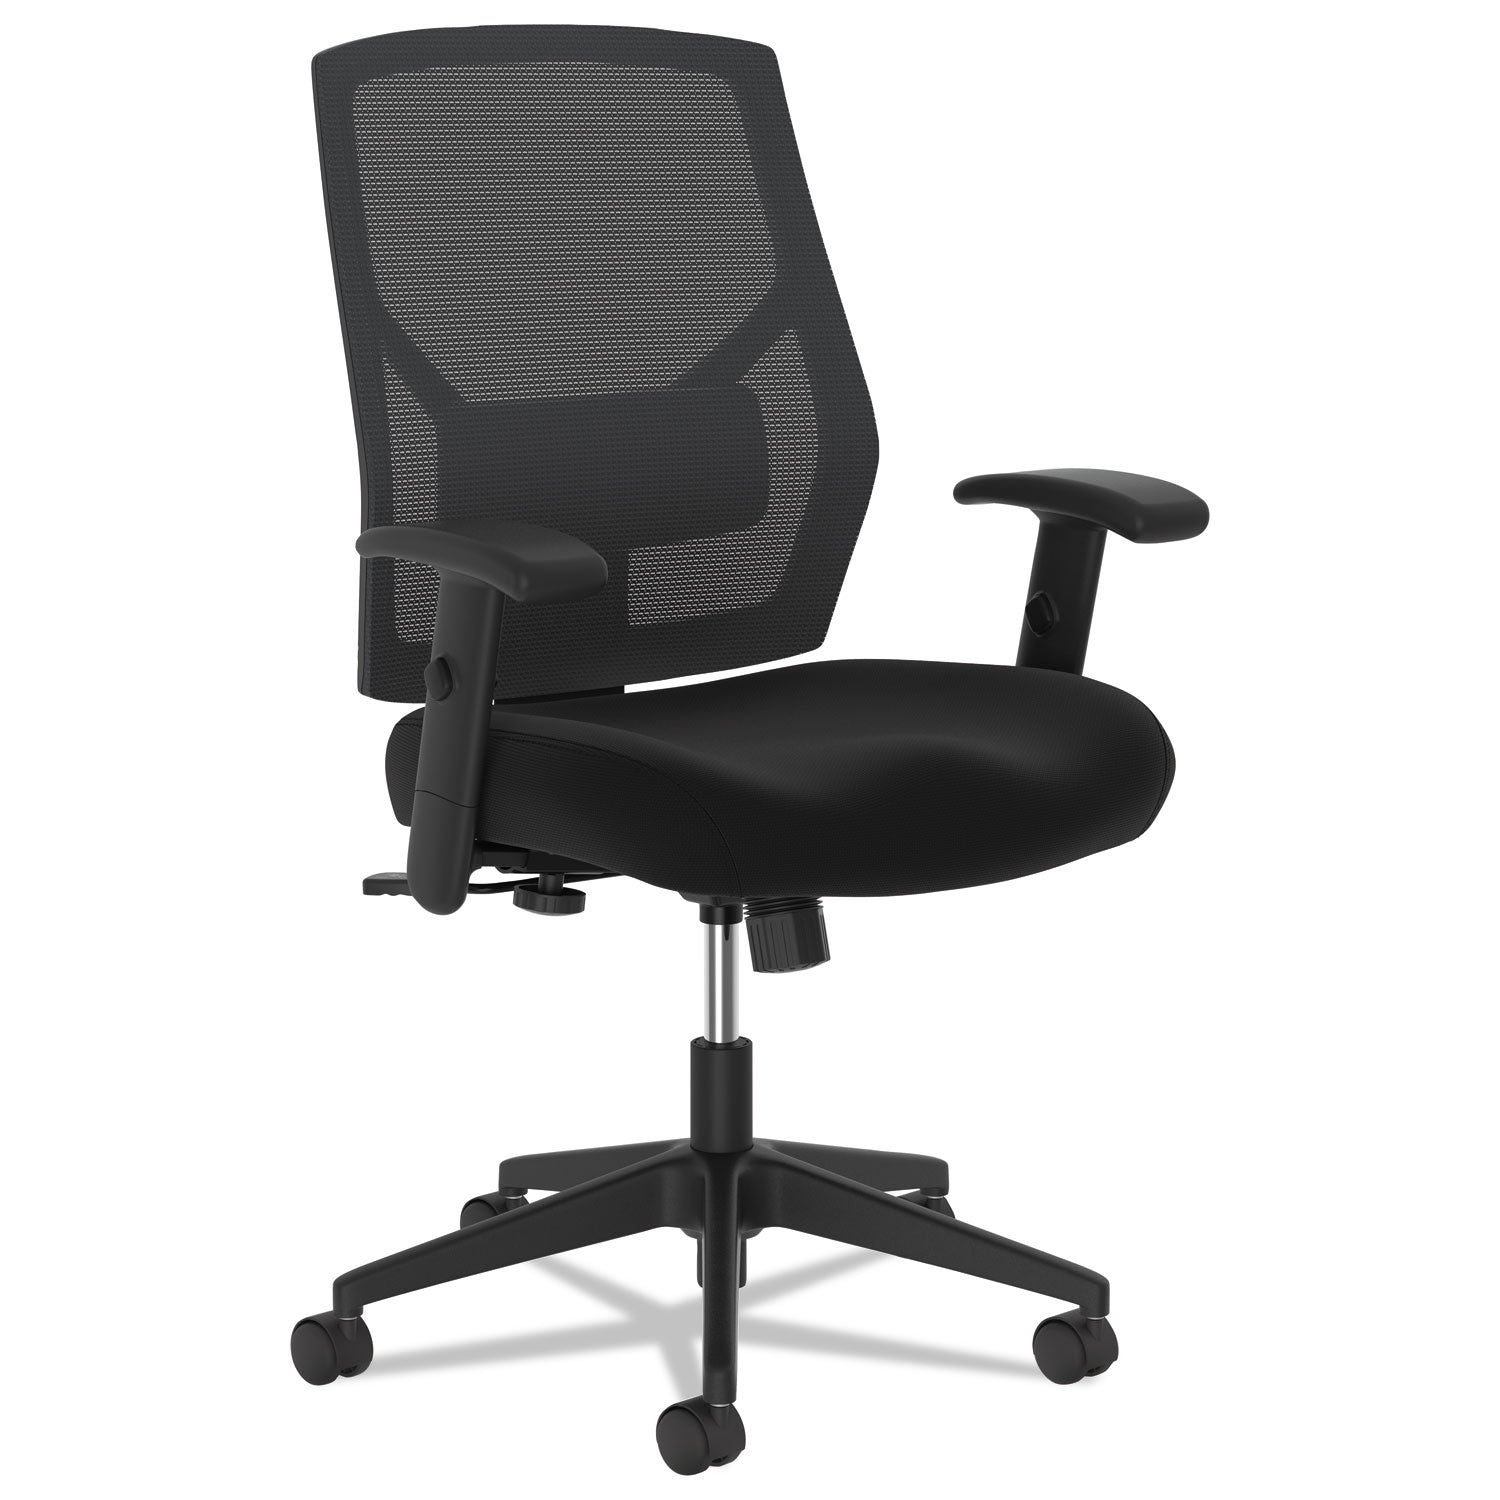 vl581-high-back-task-chair-supports-up-to-250-lb-18-to-22-seat-height-black_bsxvl581es10t - 1